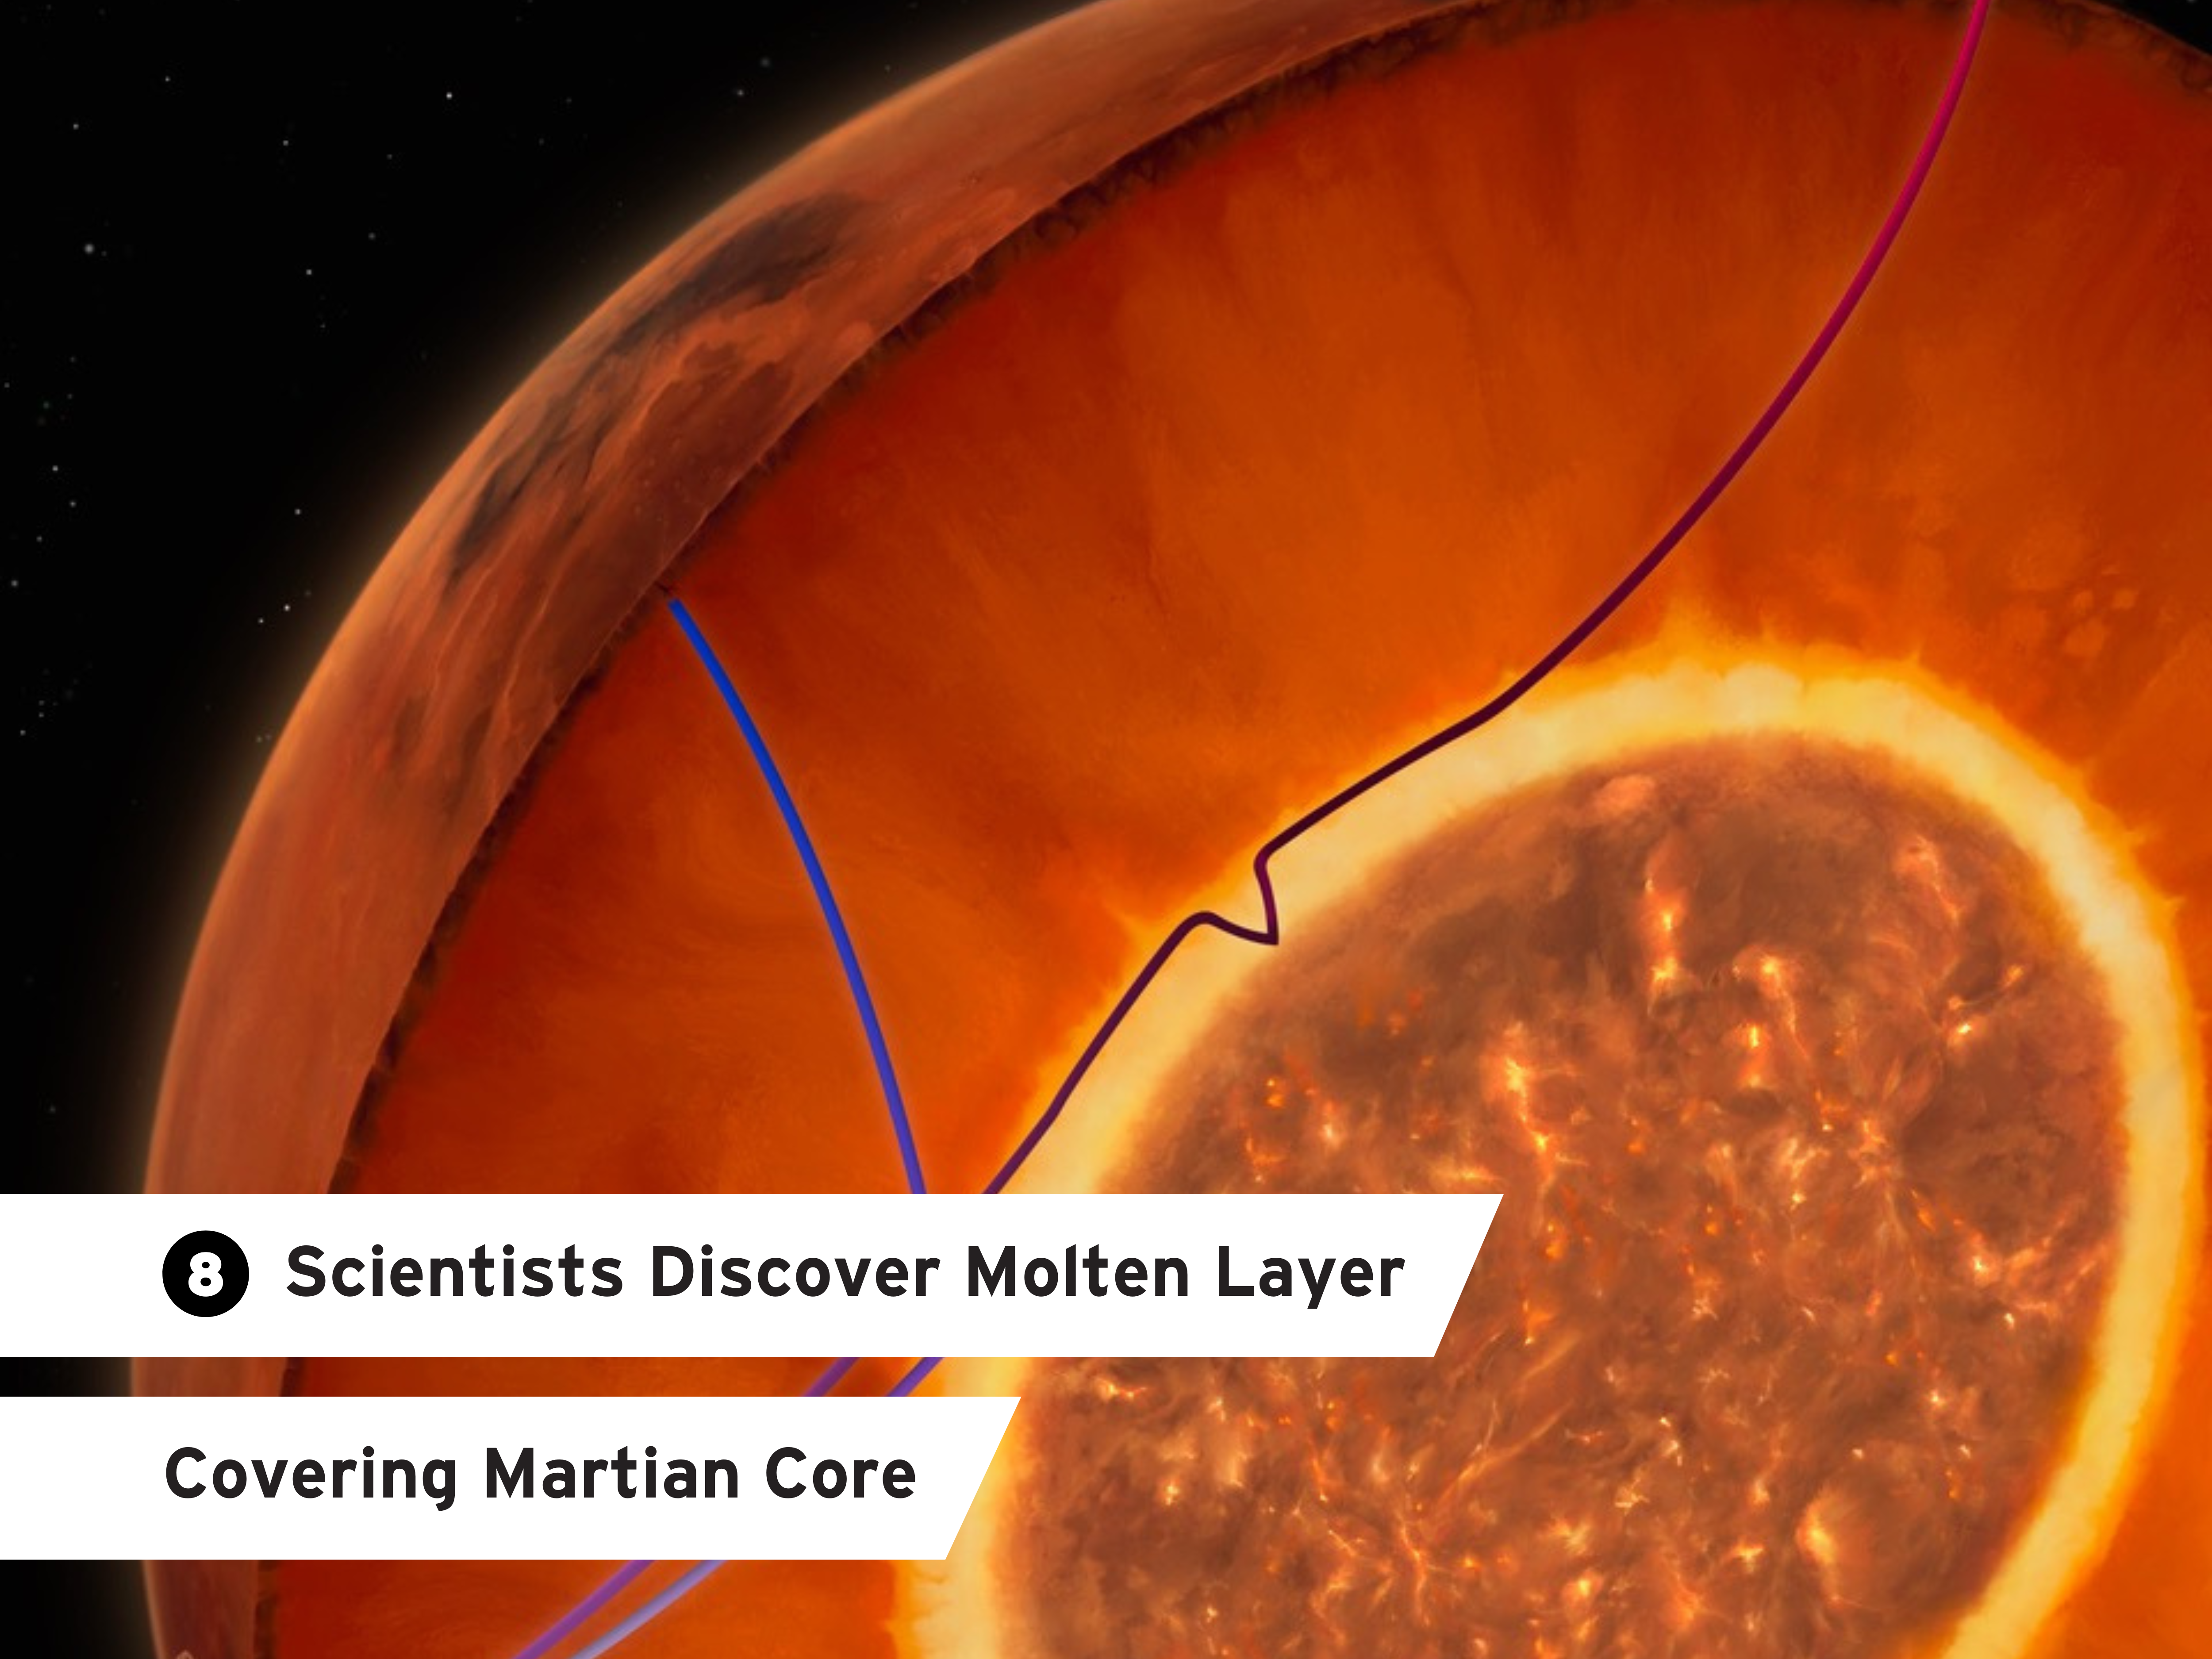 "Scientists Discover Molten Layer Covering Martian Core" over a background showing Mars' core